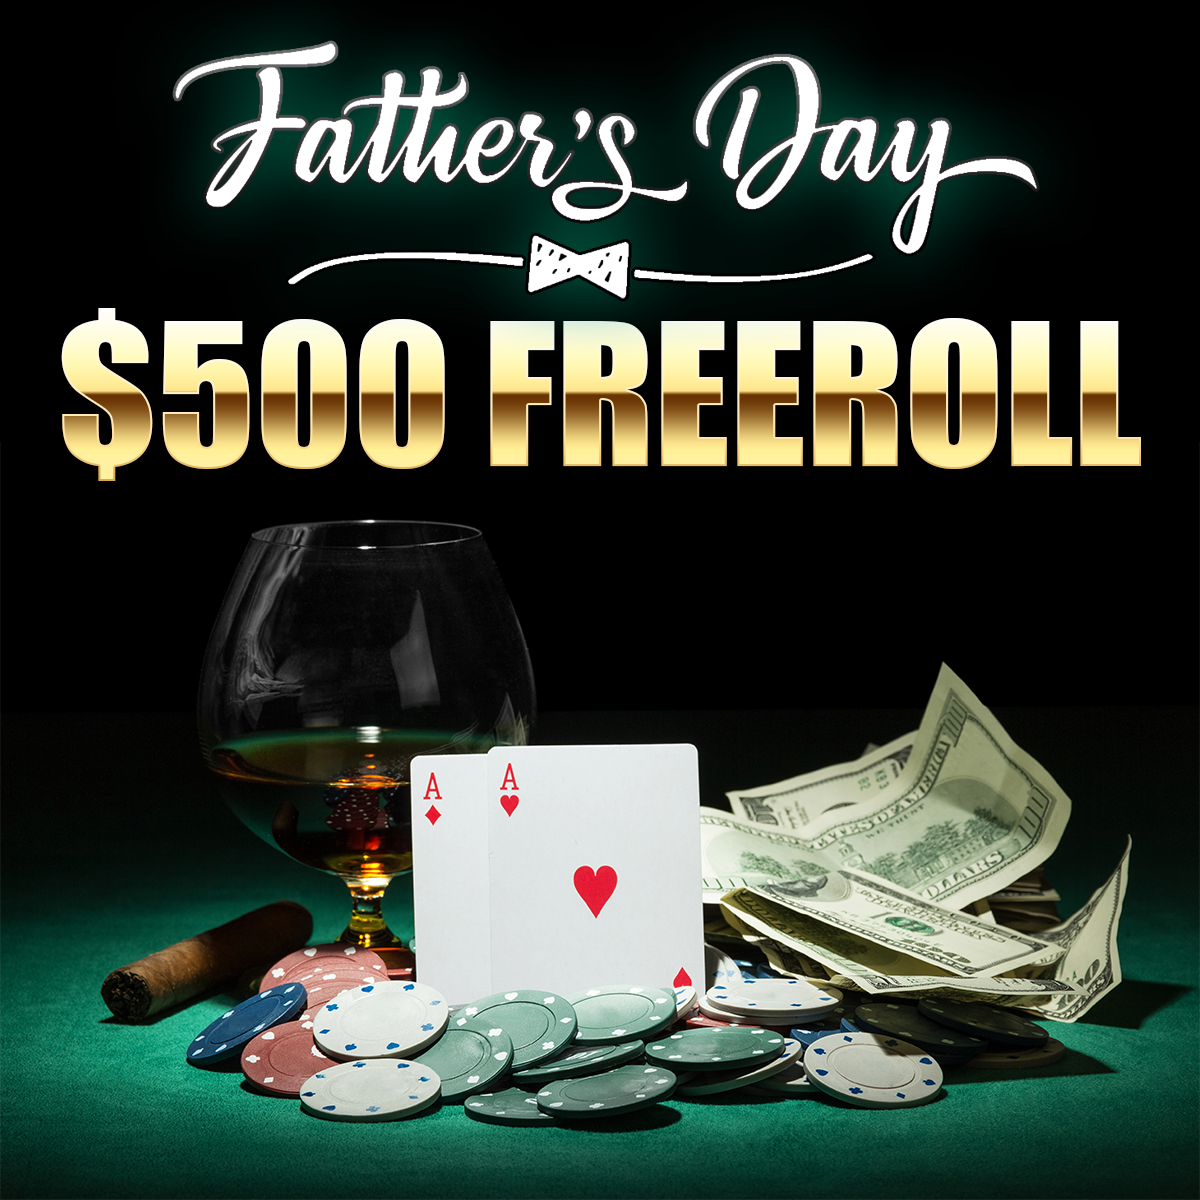 $500 Father's Day Freeroll Poker Tournament